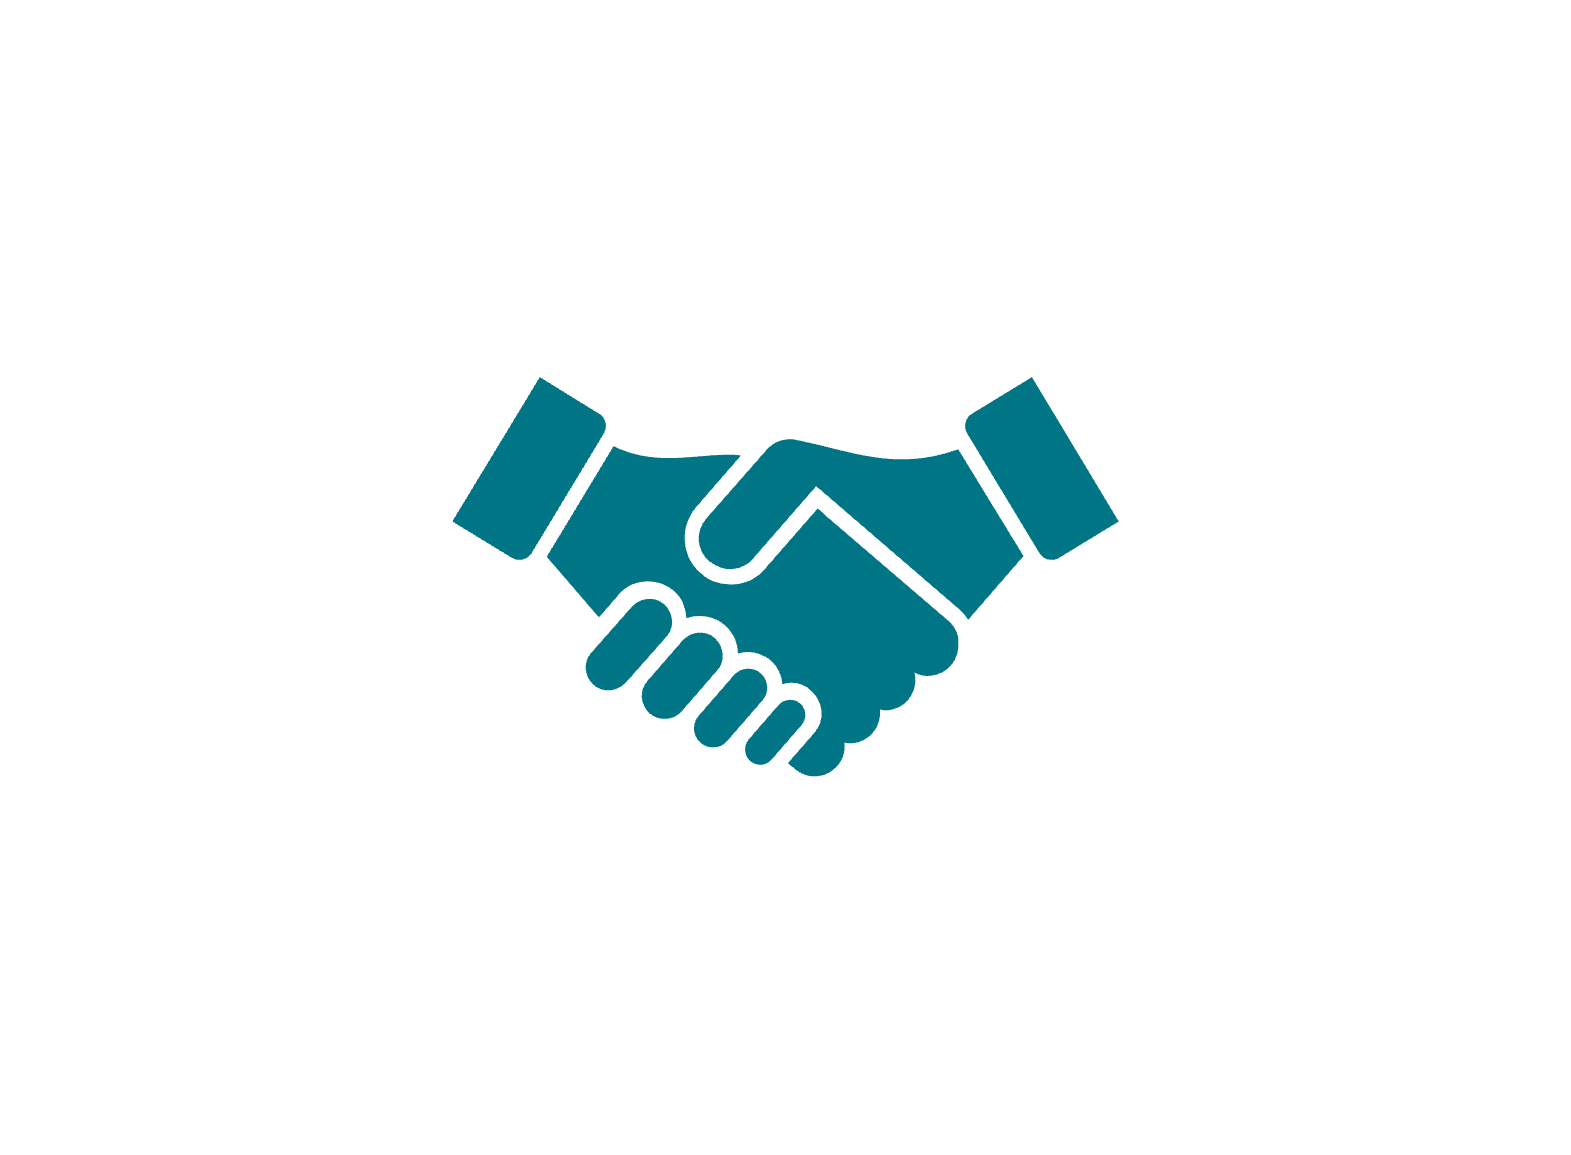 A blue handshake icon on a white background.